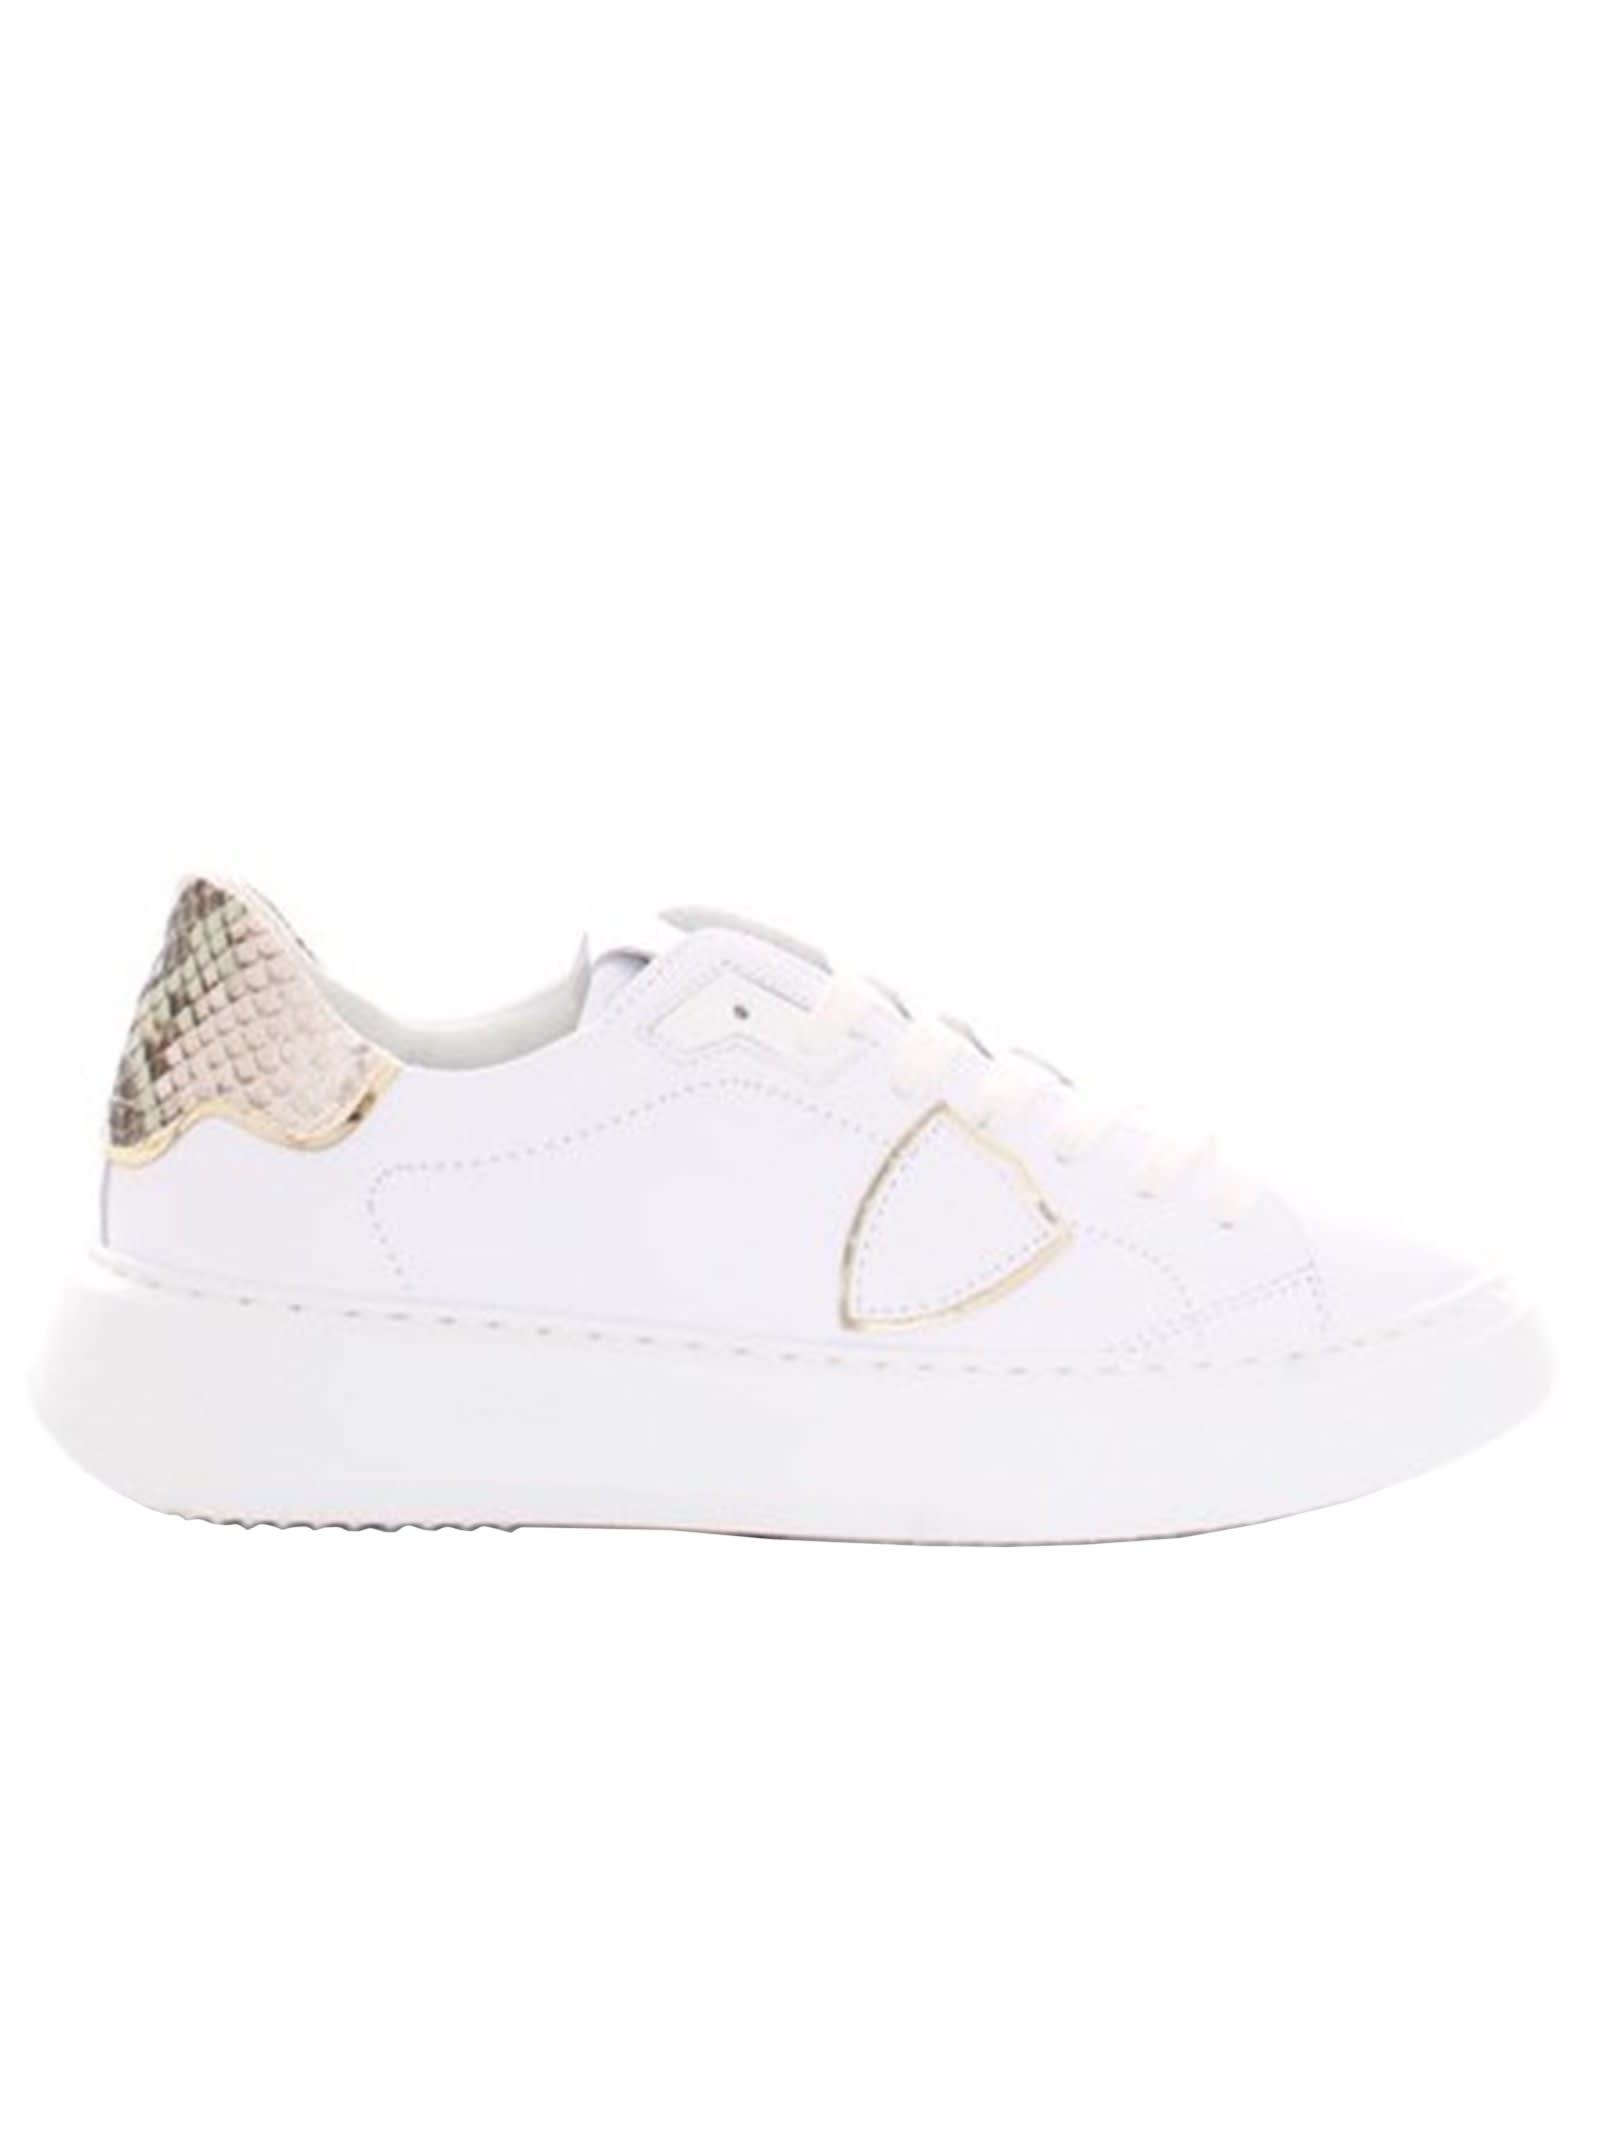 Philippe Model White/phyton Leather Sneakers